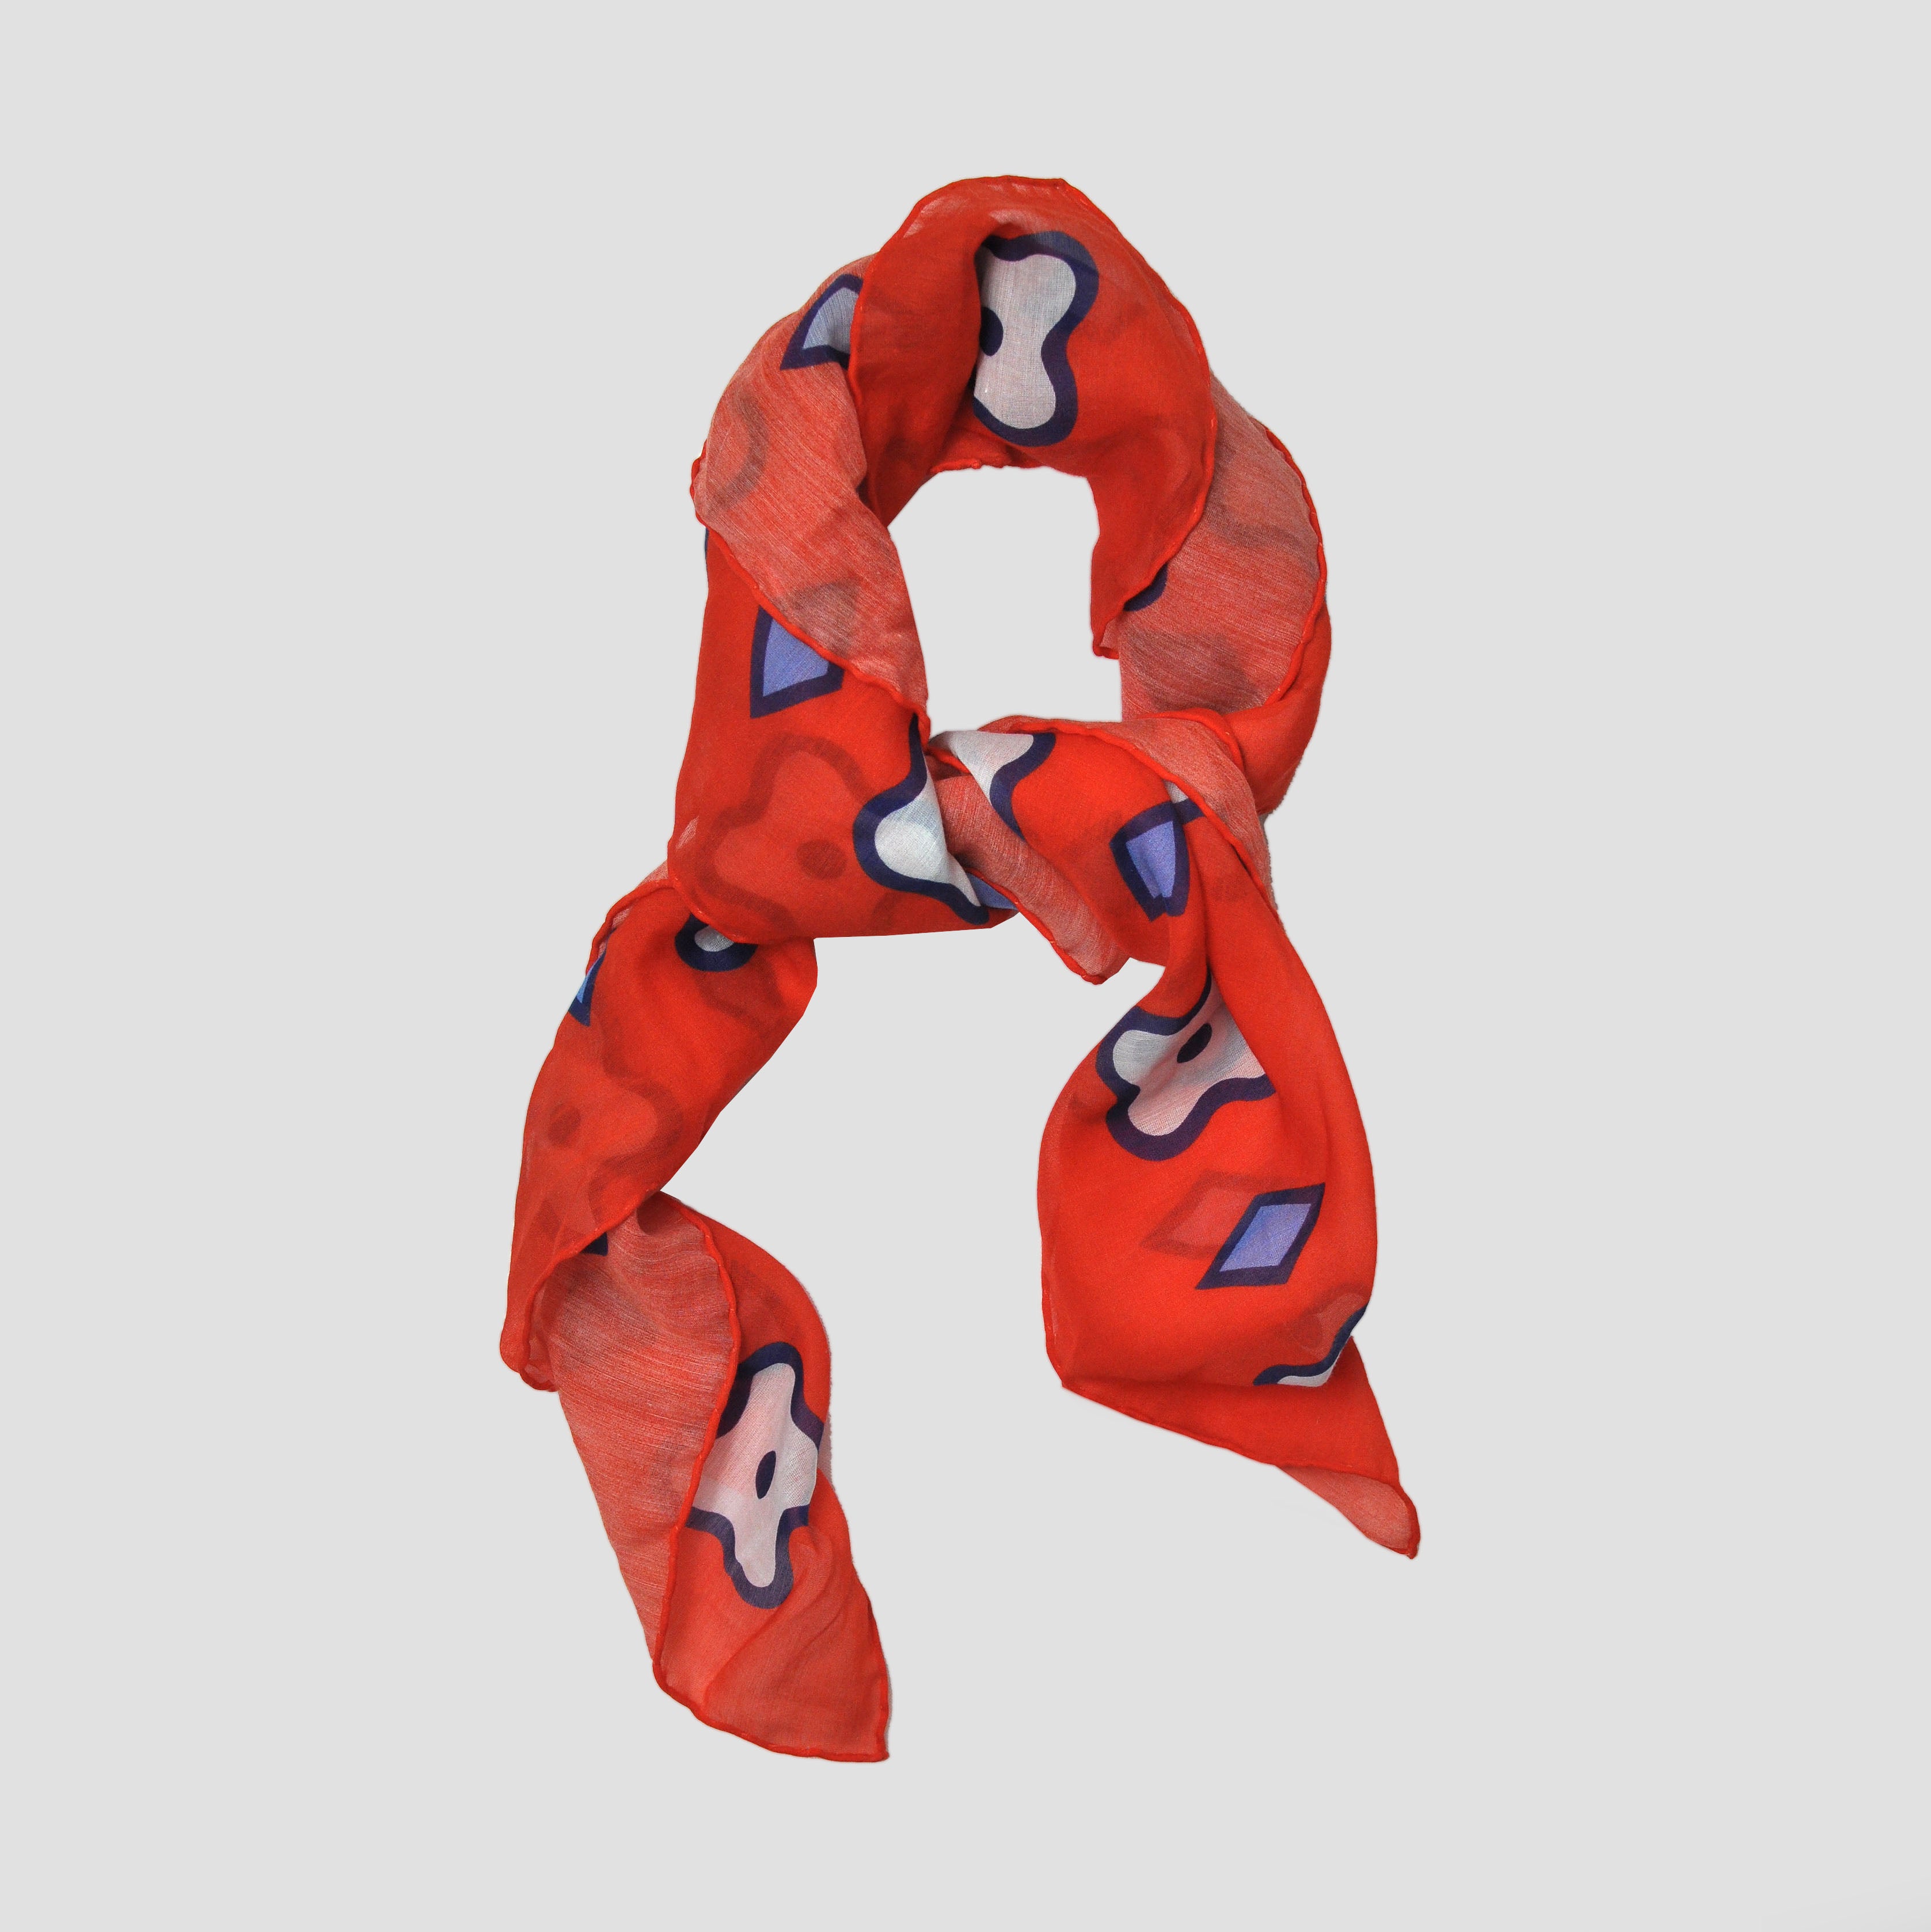 Mix of Shapes Bandana in Red, Blue & White